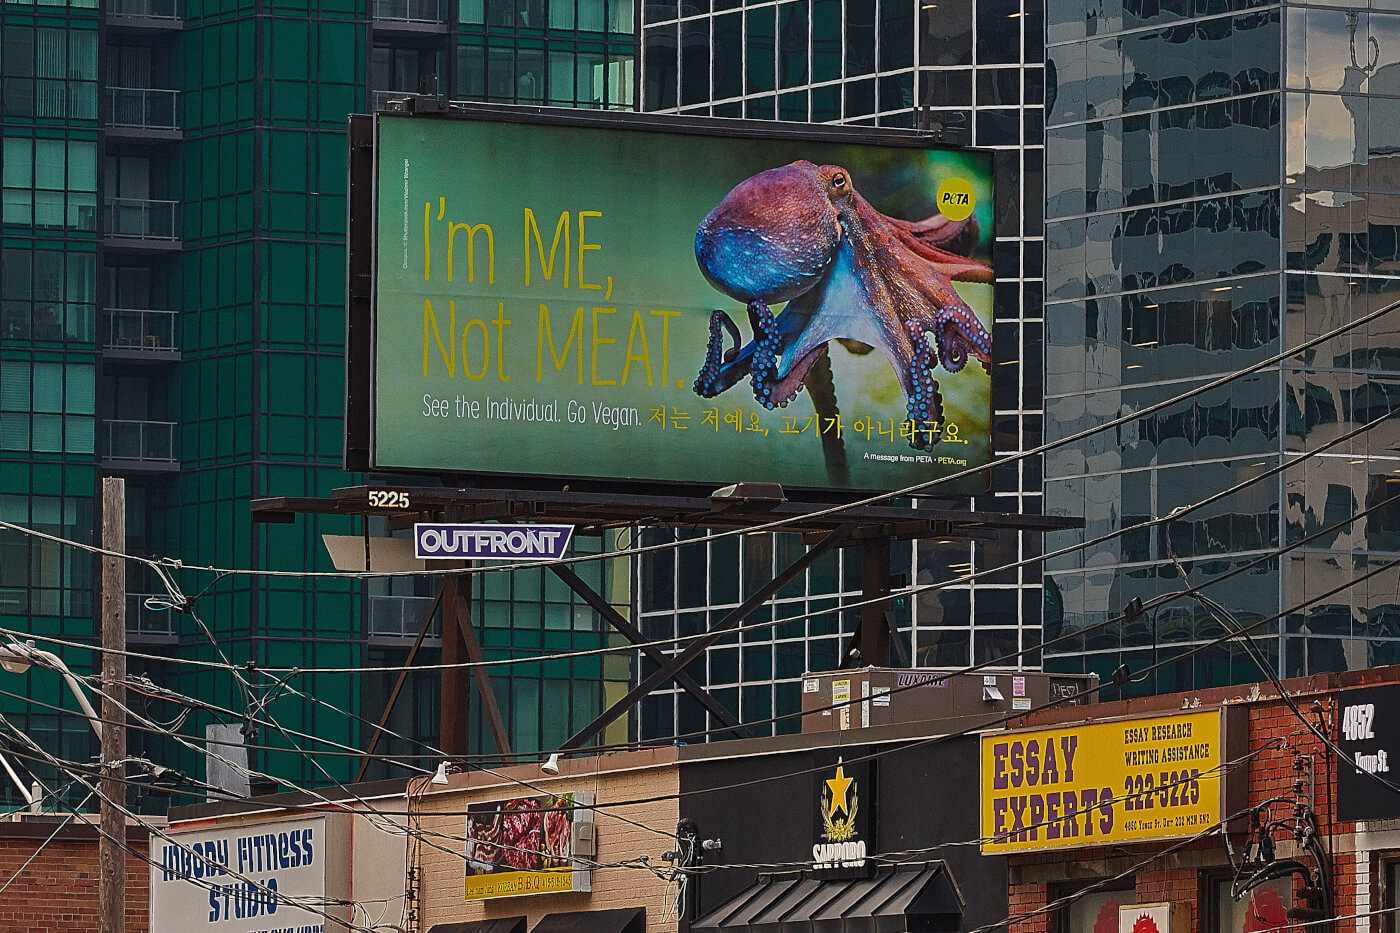 "im me. not meat" Octopus Billboard on display above a building in Toronto, ON